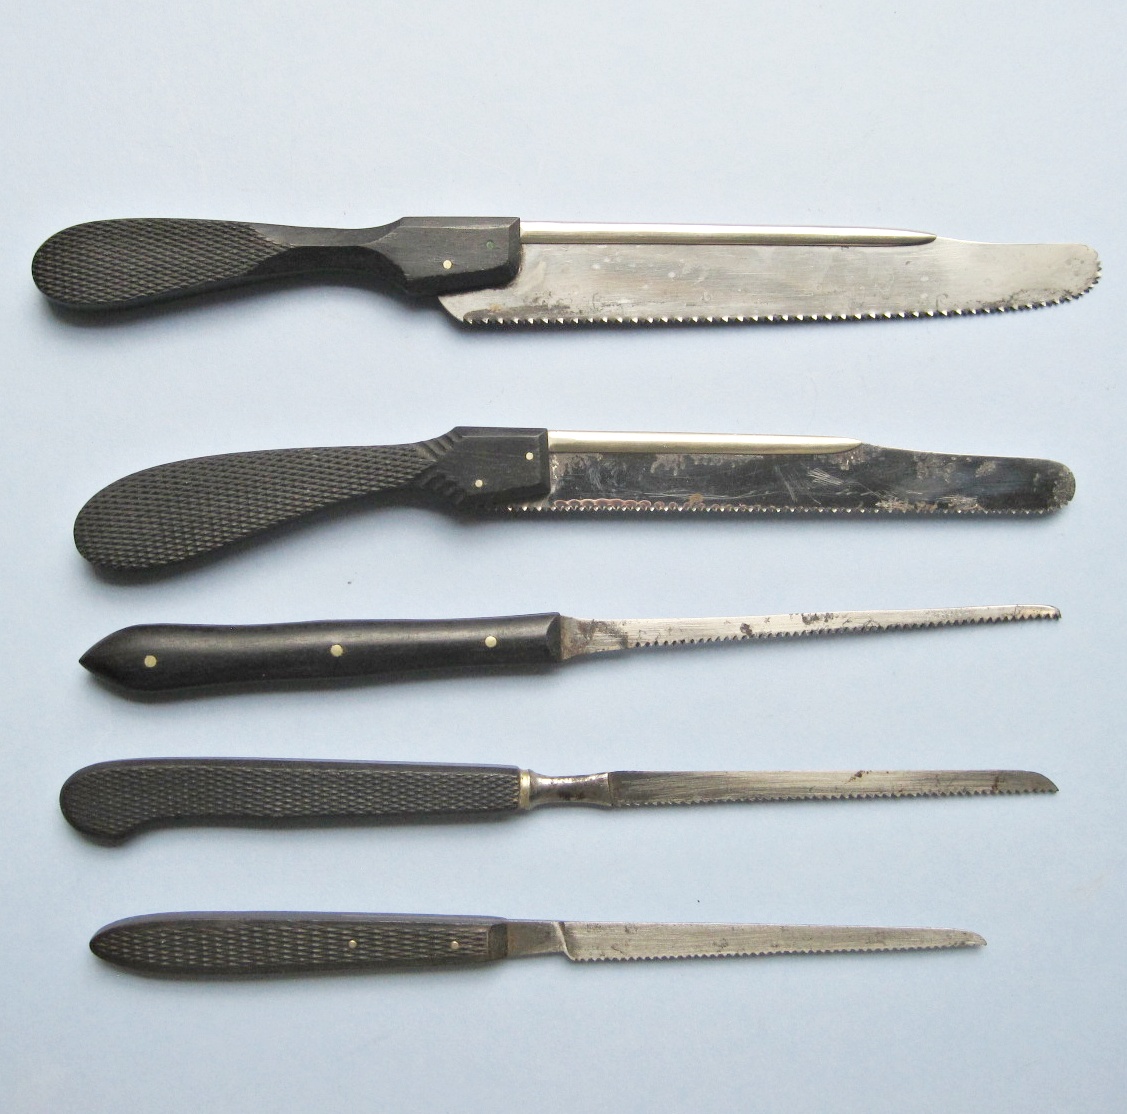 FIVE 19TH-CENTURY METACARPAL SAWS: ALL WITH EBONY HANDLES